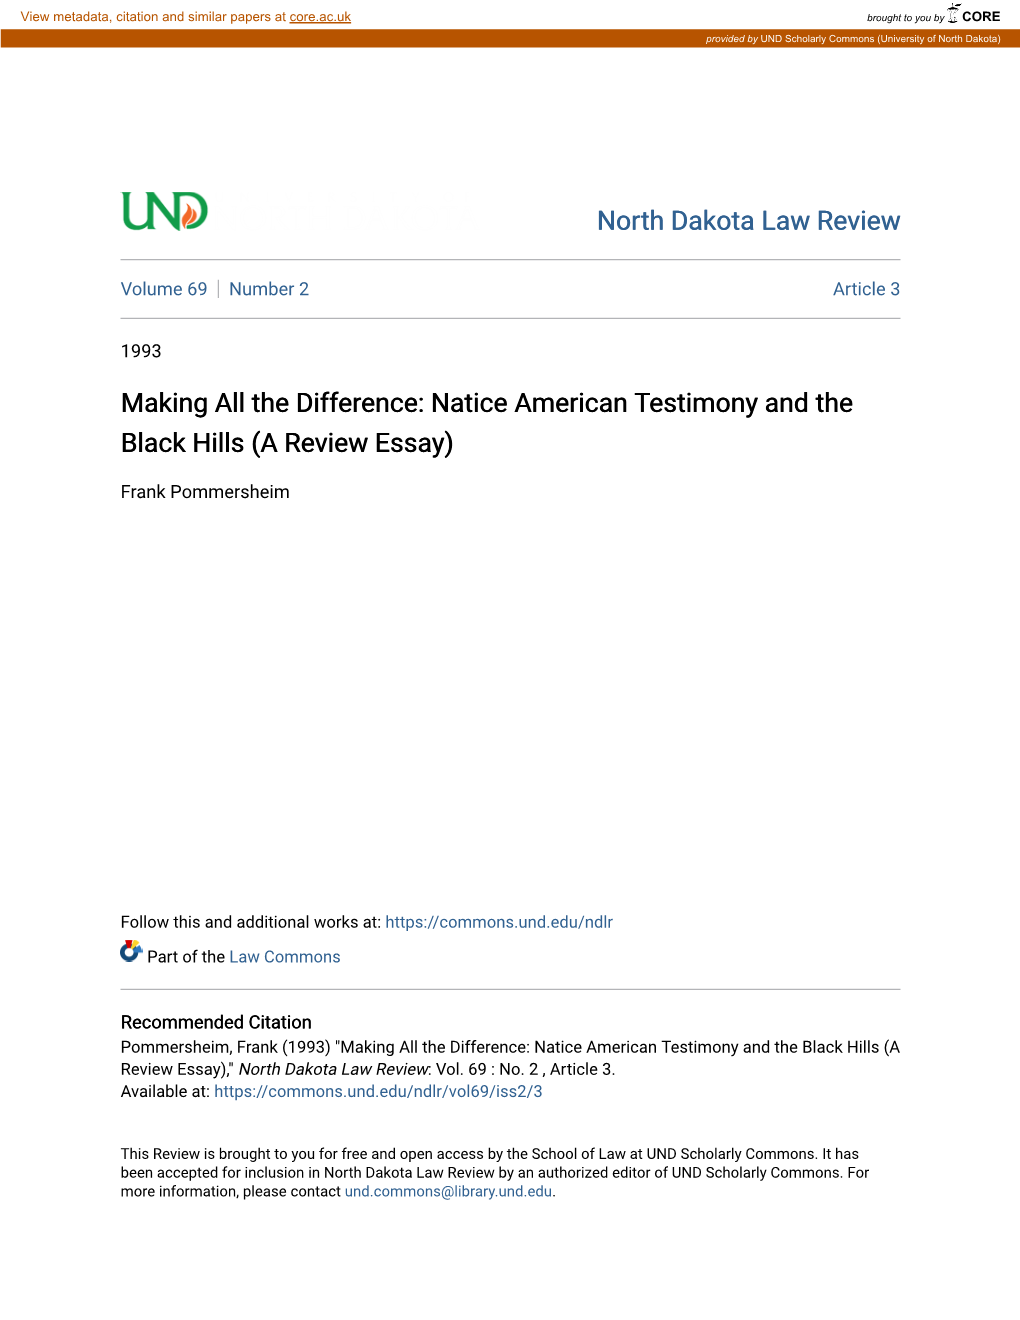 Natice American Testimony and the Black Hills (A Review Essay)